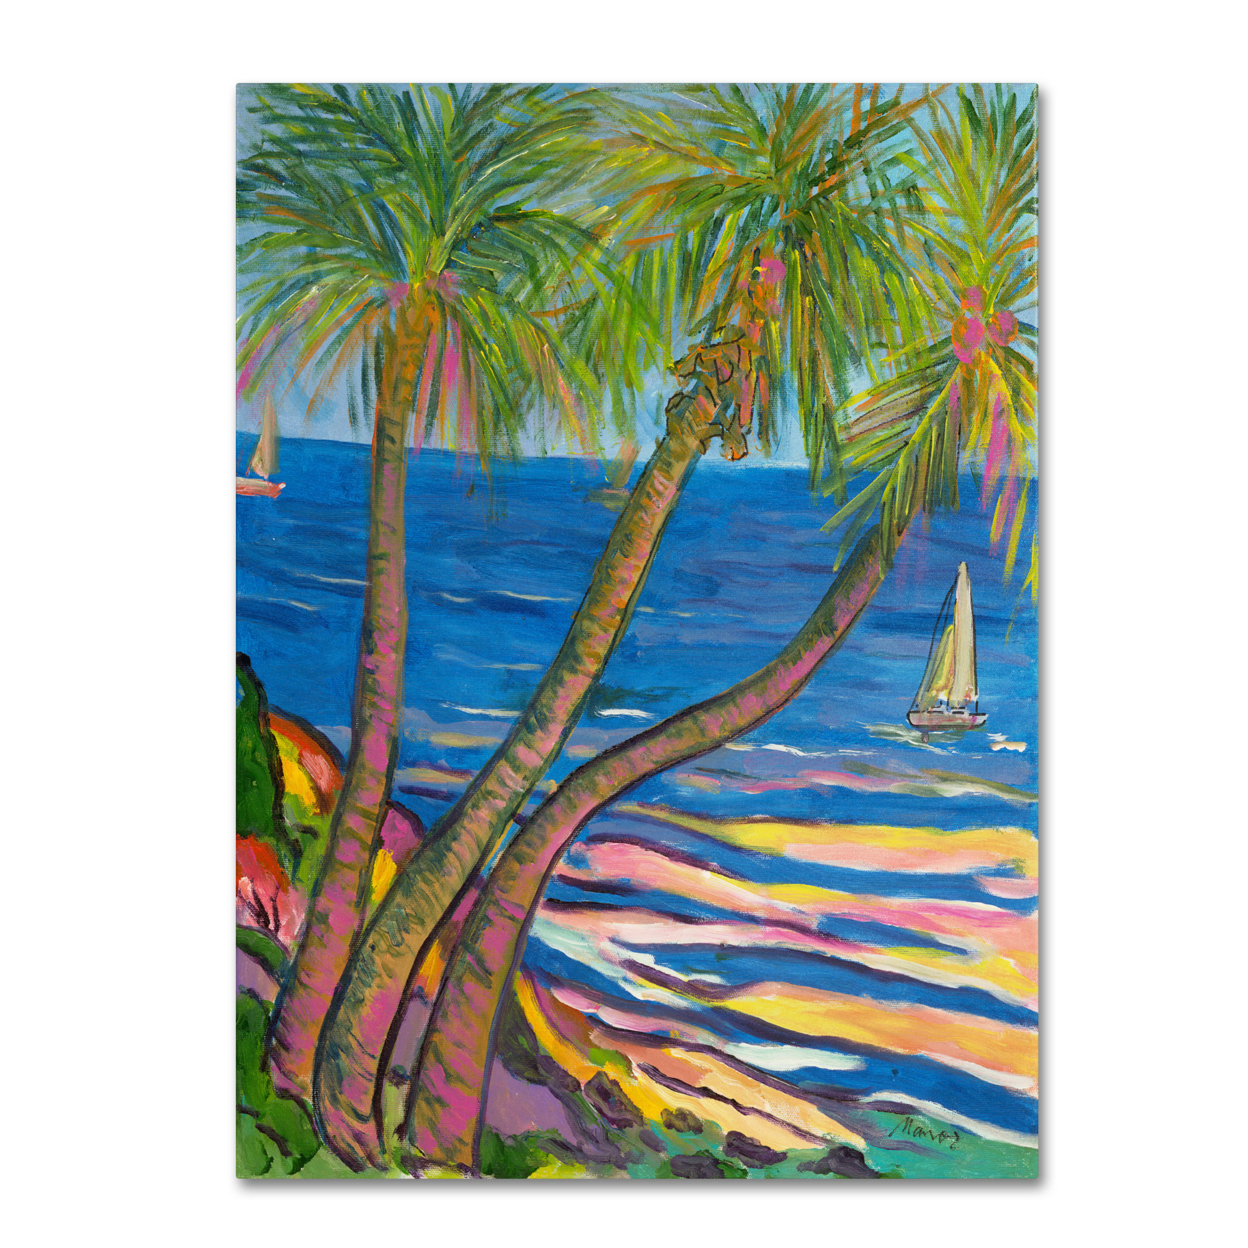 Manor Shadian 'Three Coconut Palms' Canvas Wall Art 35 X 47 Inches